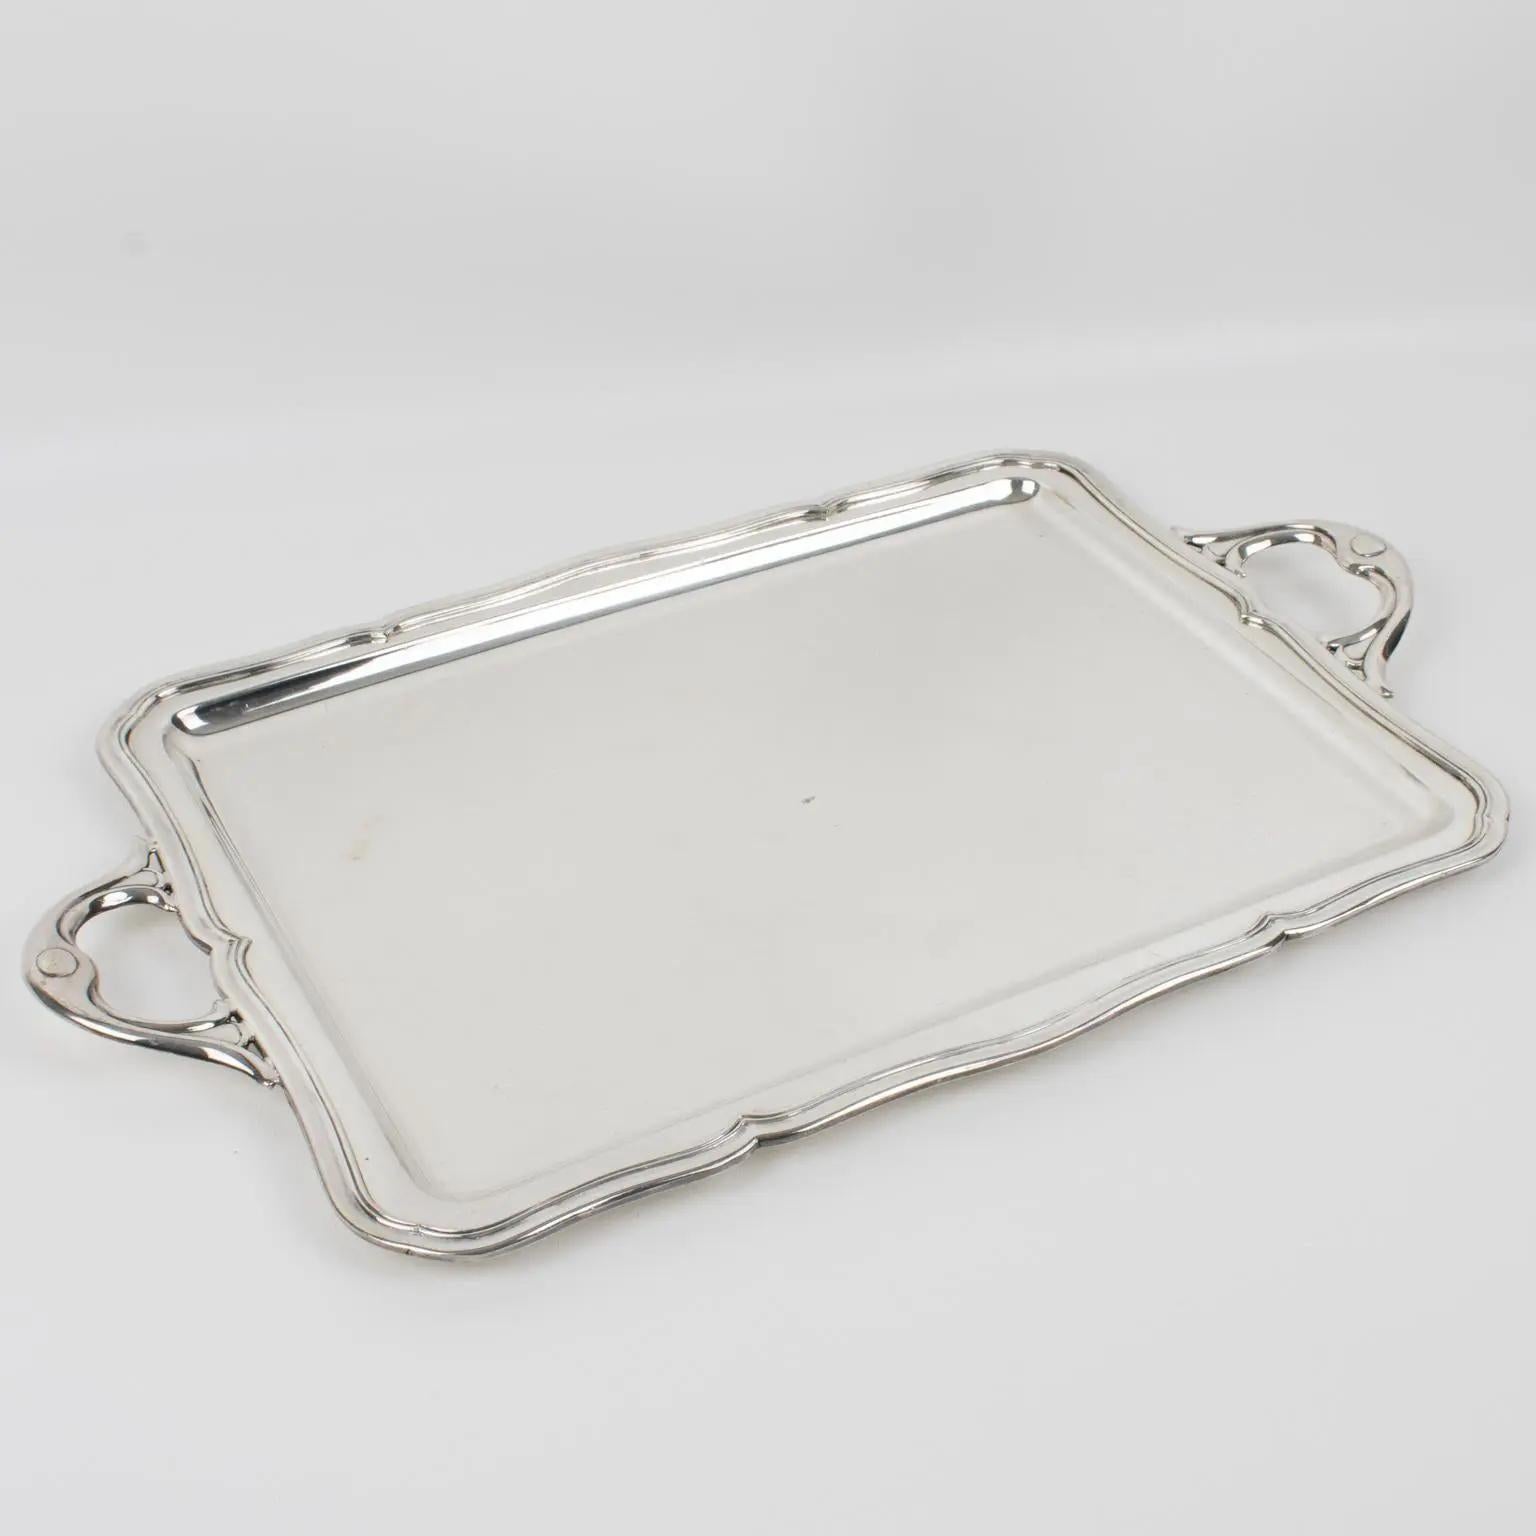 This serving tray is made of Alpaca silver plate and has a modern rectangular shape with raised edges and decorative handles. The underside bears legal silversmith hallmarks and reads 